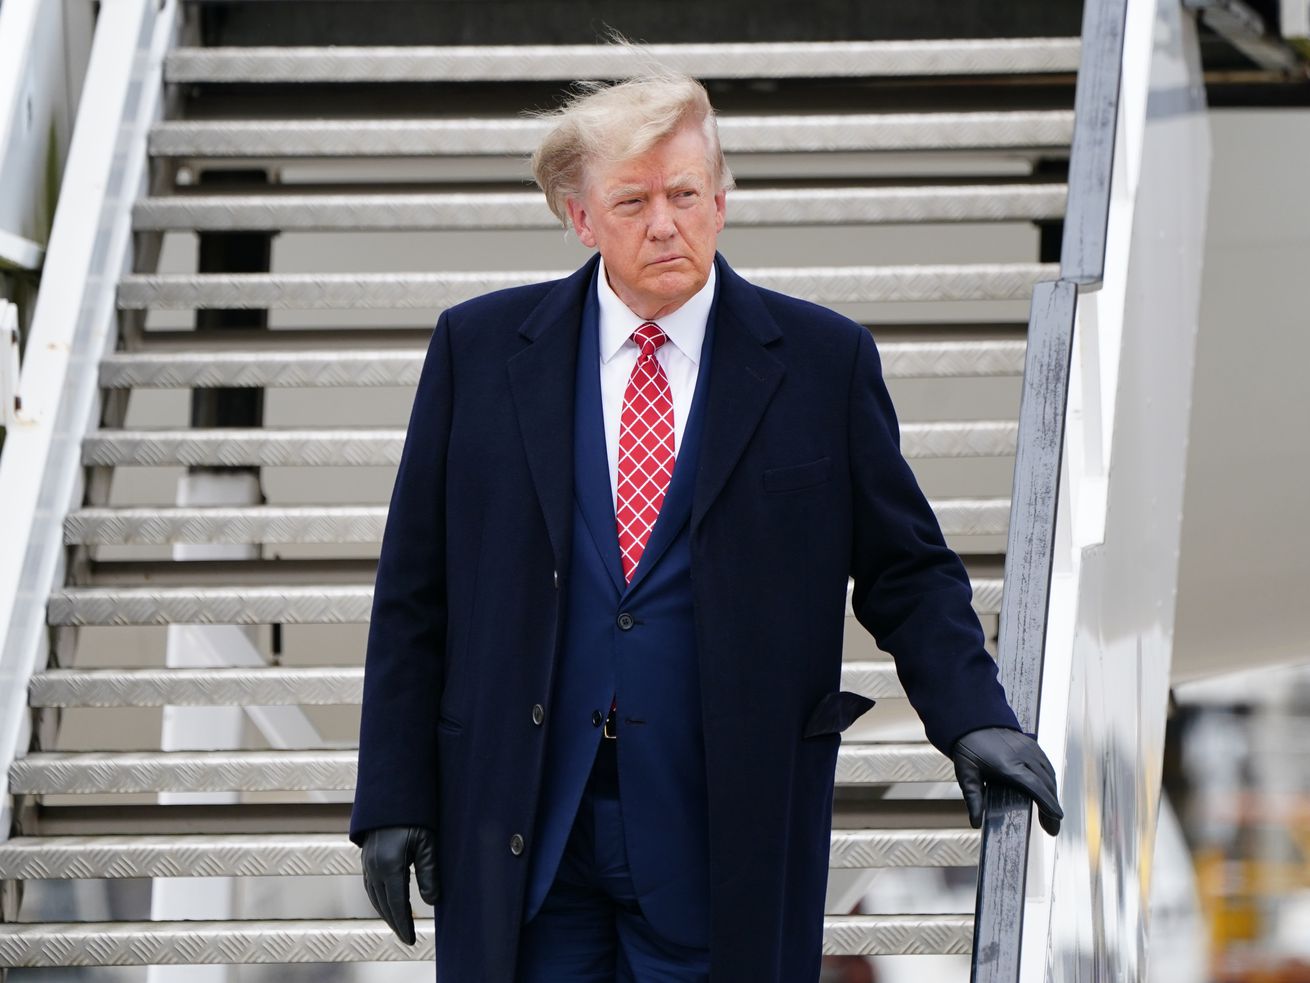 Donald Trump descending an airplane stairway with his hair blown askew.